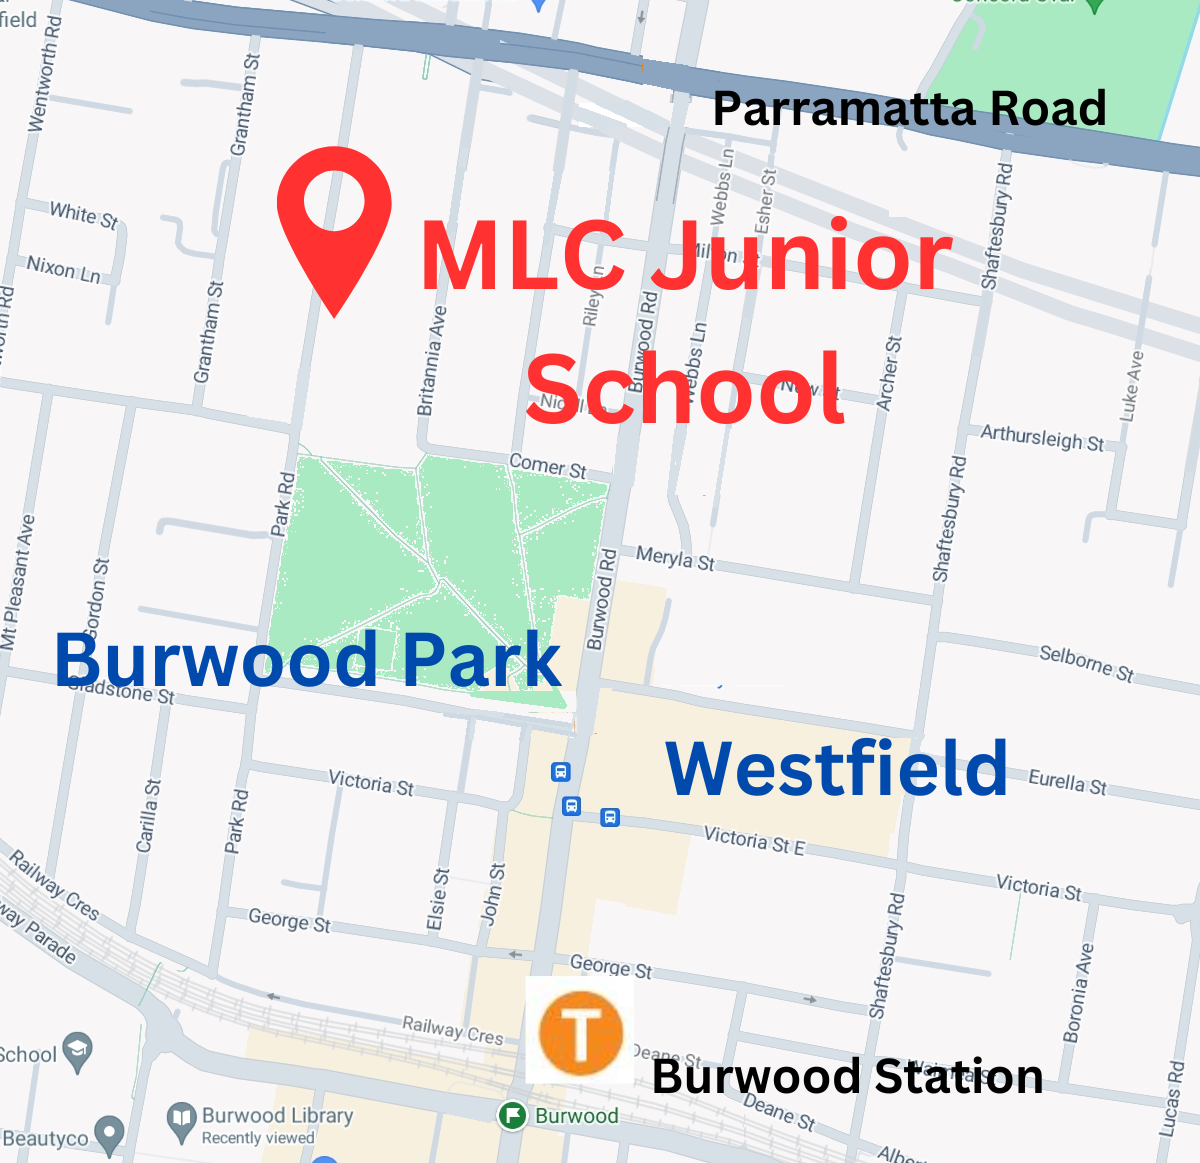 Map of Burwood NSW showing the location of MLC Junior School